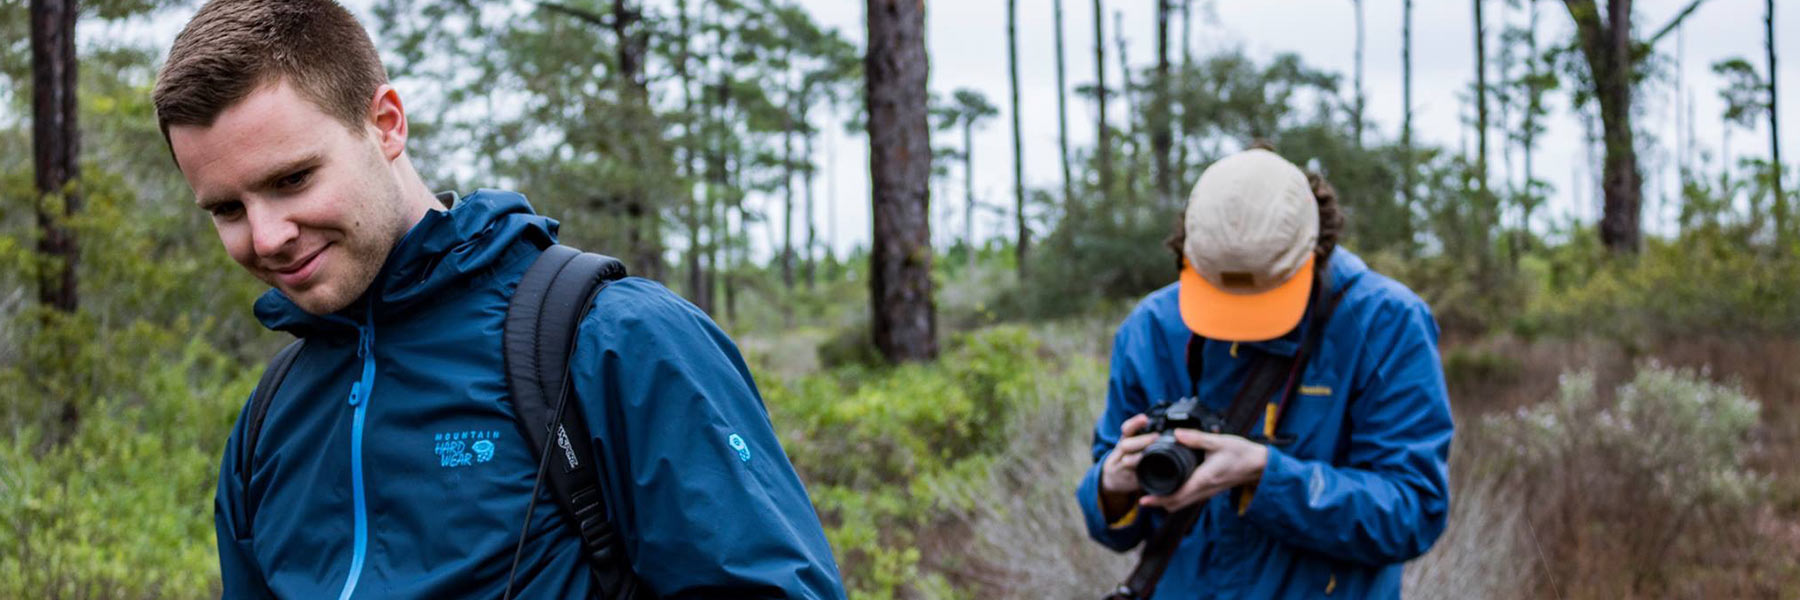 Two men walk through a wooded area with camera equipment.